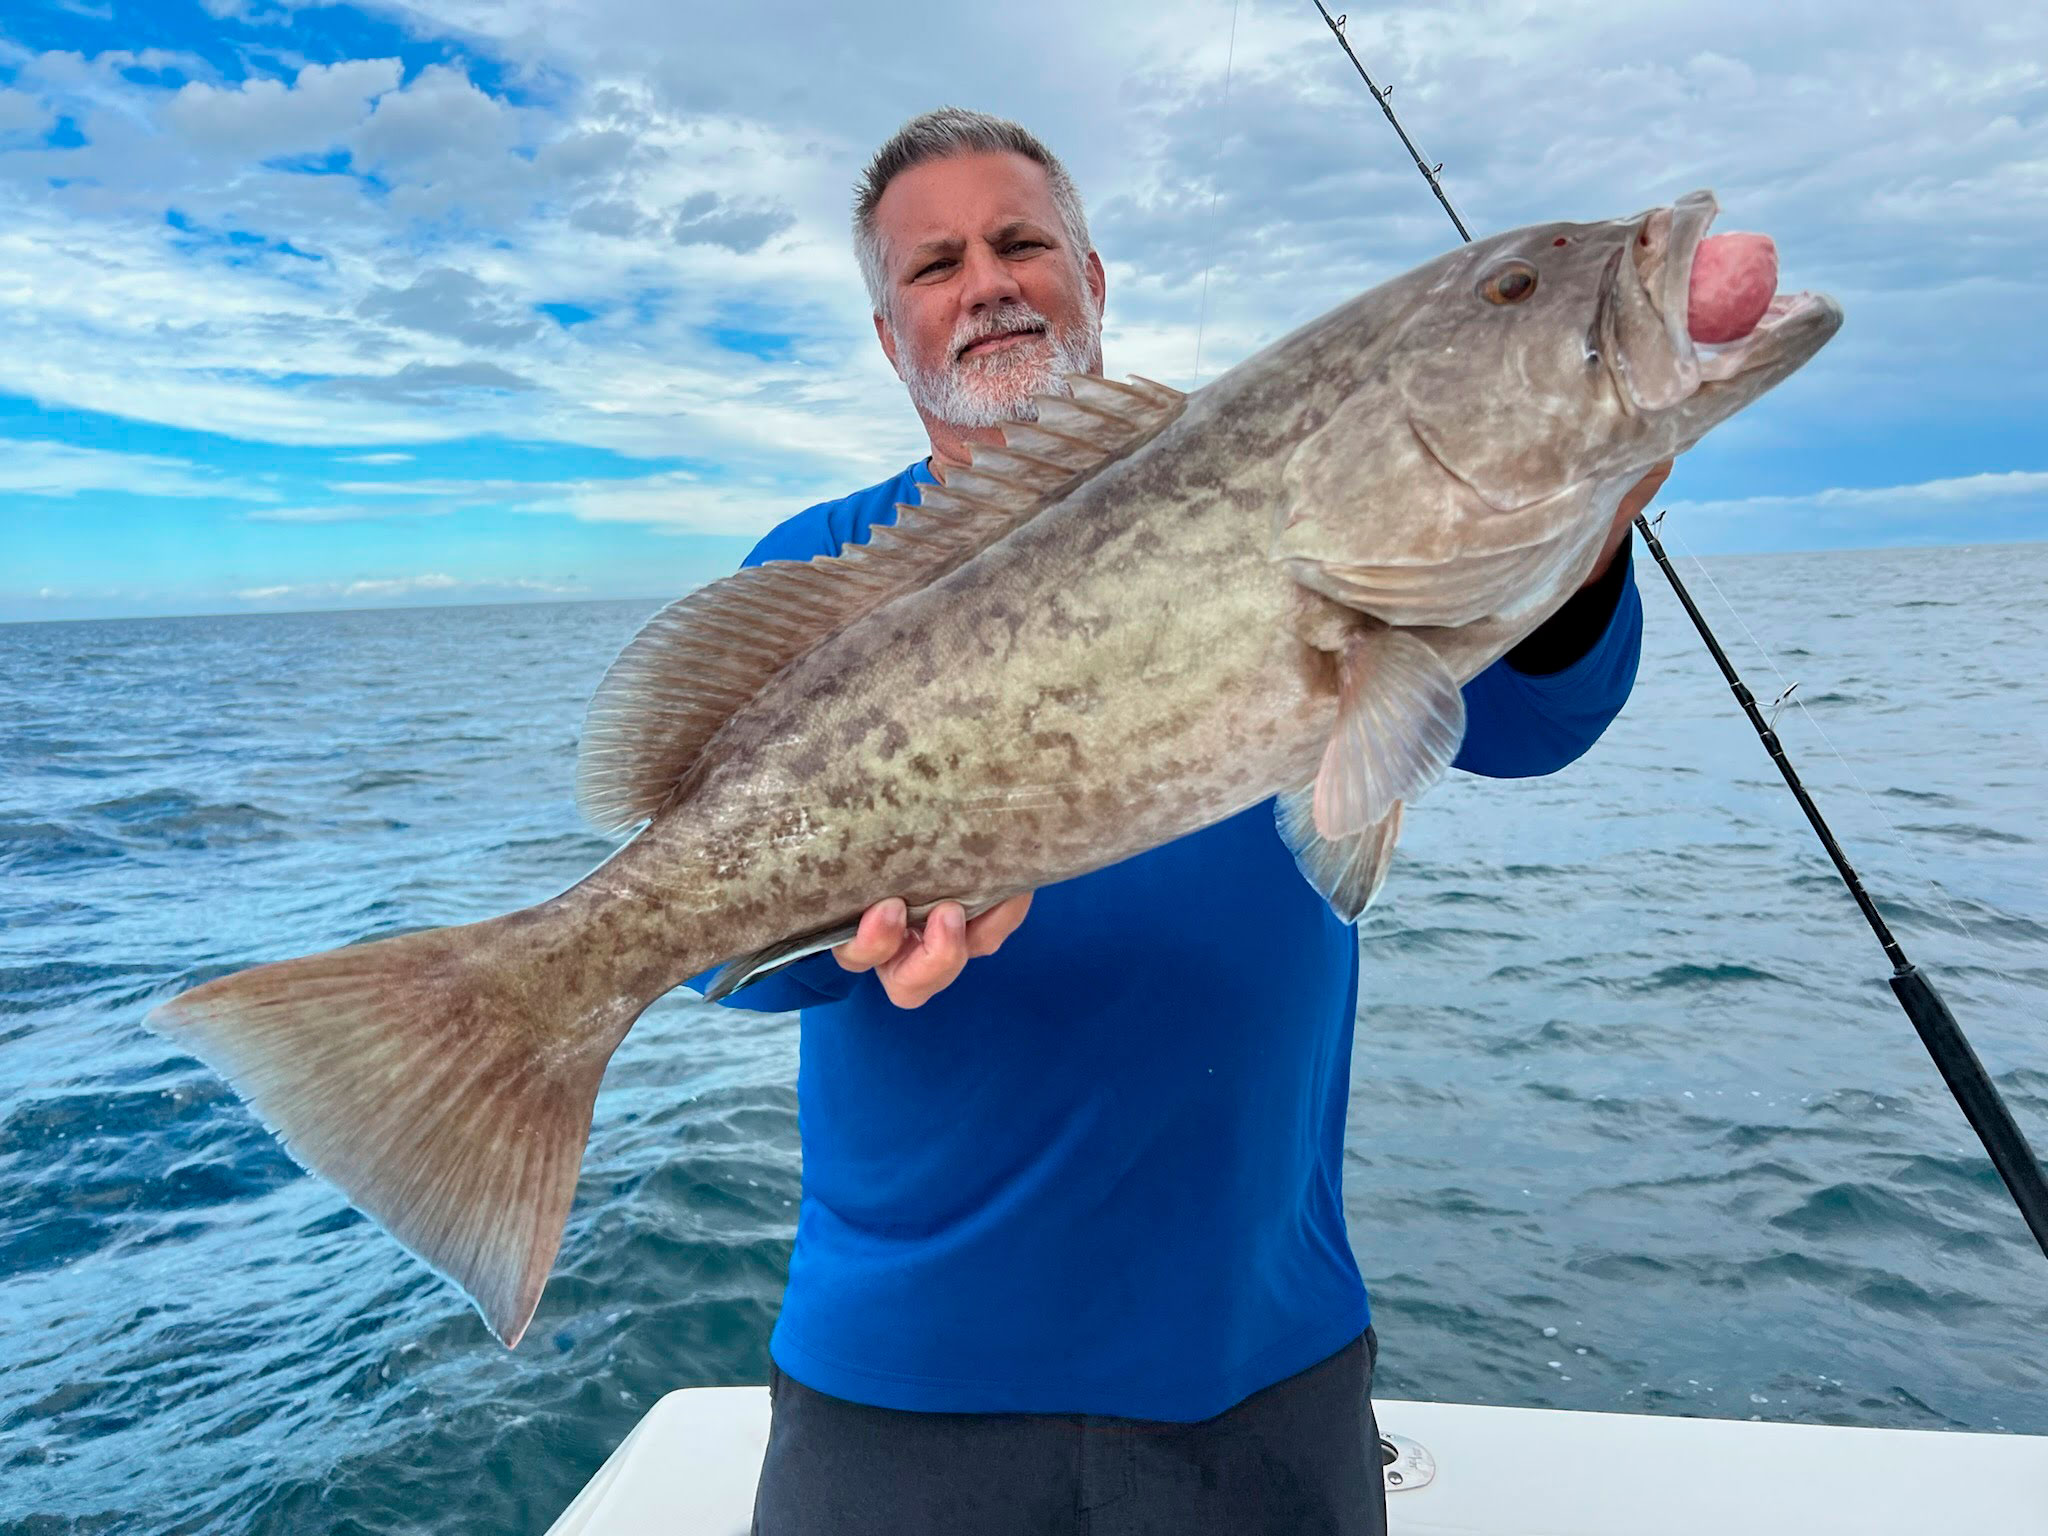 The Ultimate Guide to Catching Gag Grouper in Florida 2022